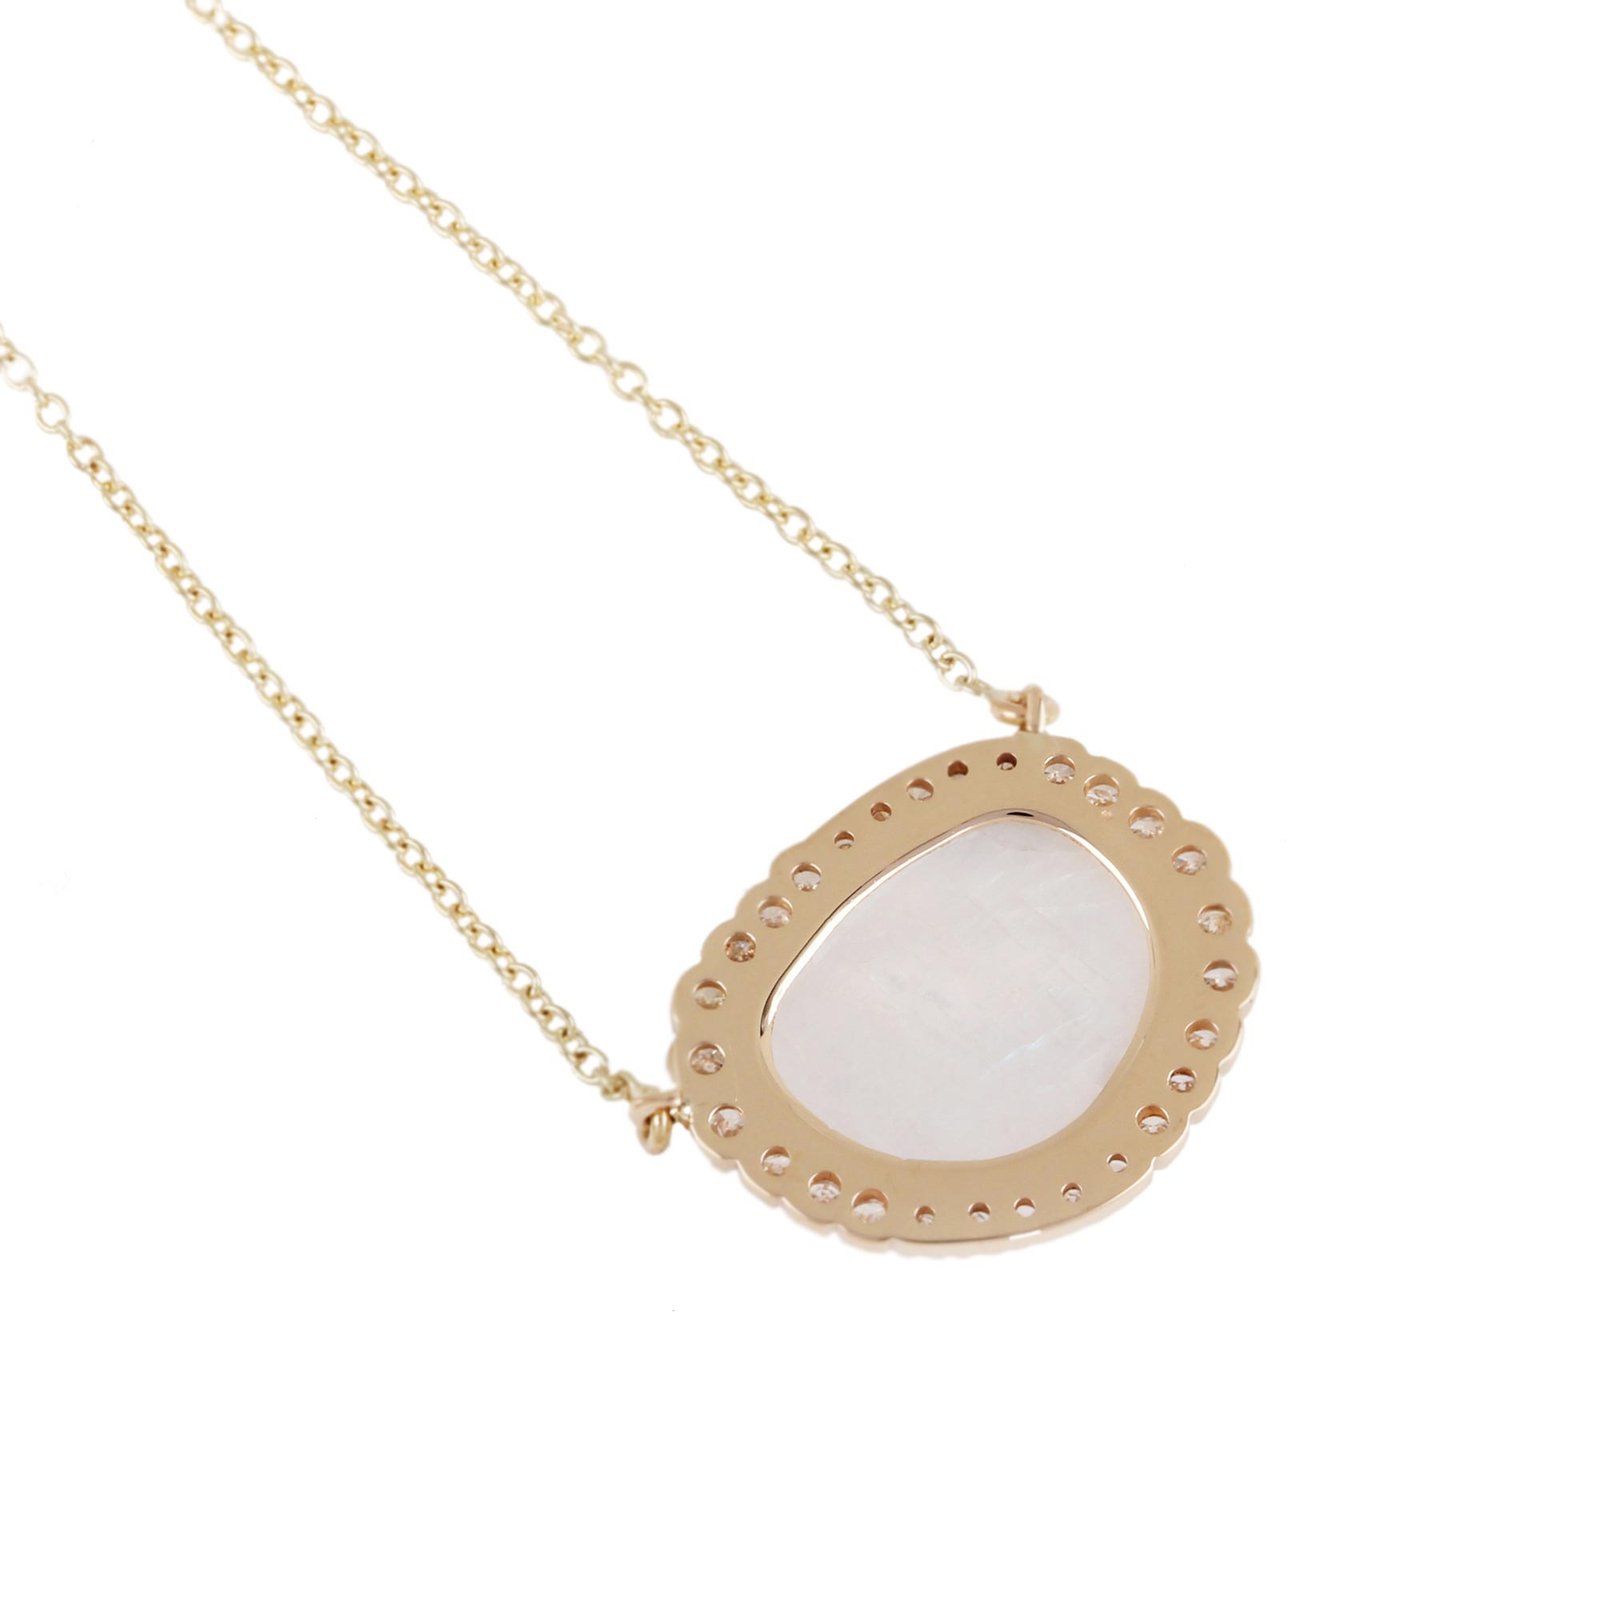 Rainbow Moonstone Pave Diamond Pendant Chain Necklace 14K Solid Gold Jewelry